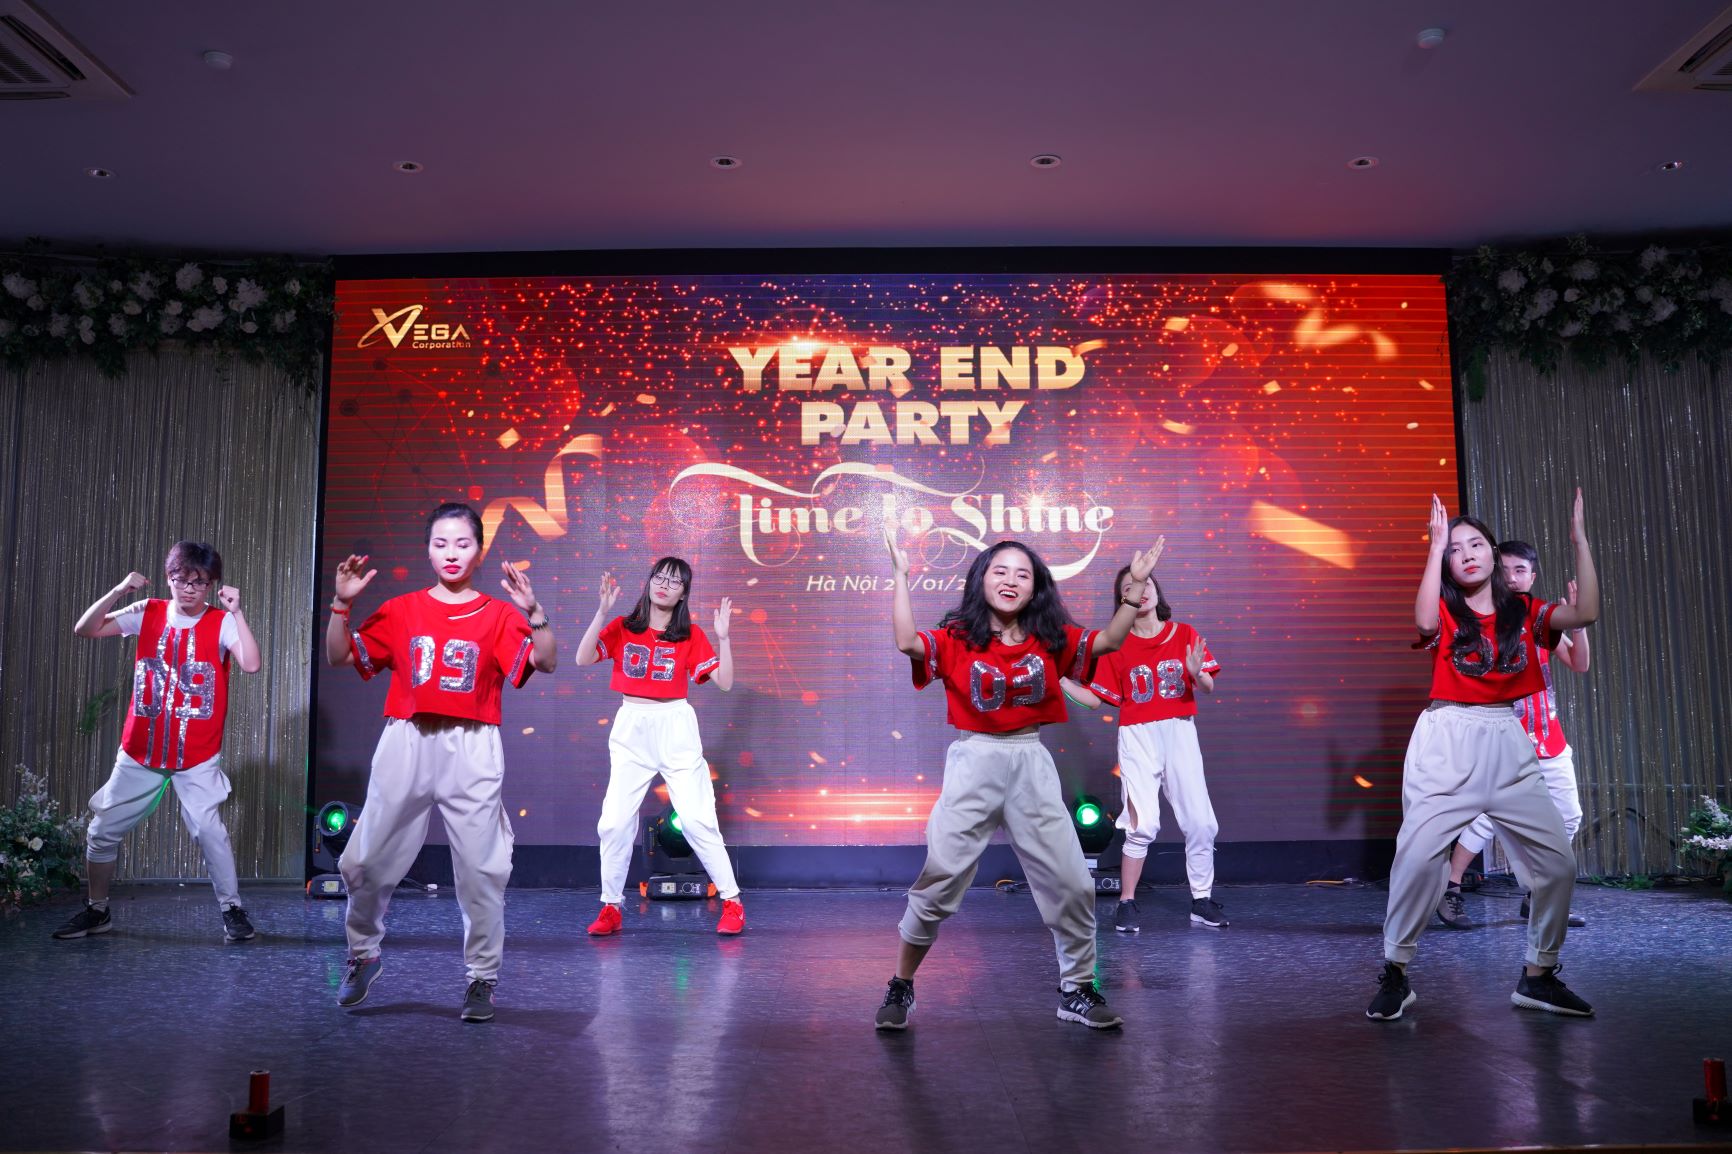 [Vega Hà Nội] Year End Party 2018 - Time To Shine 29.01.2019